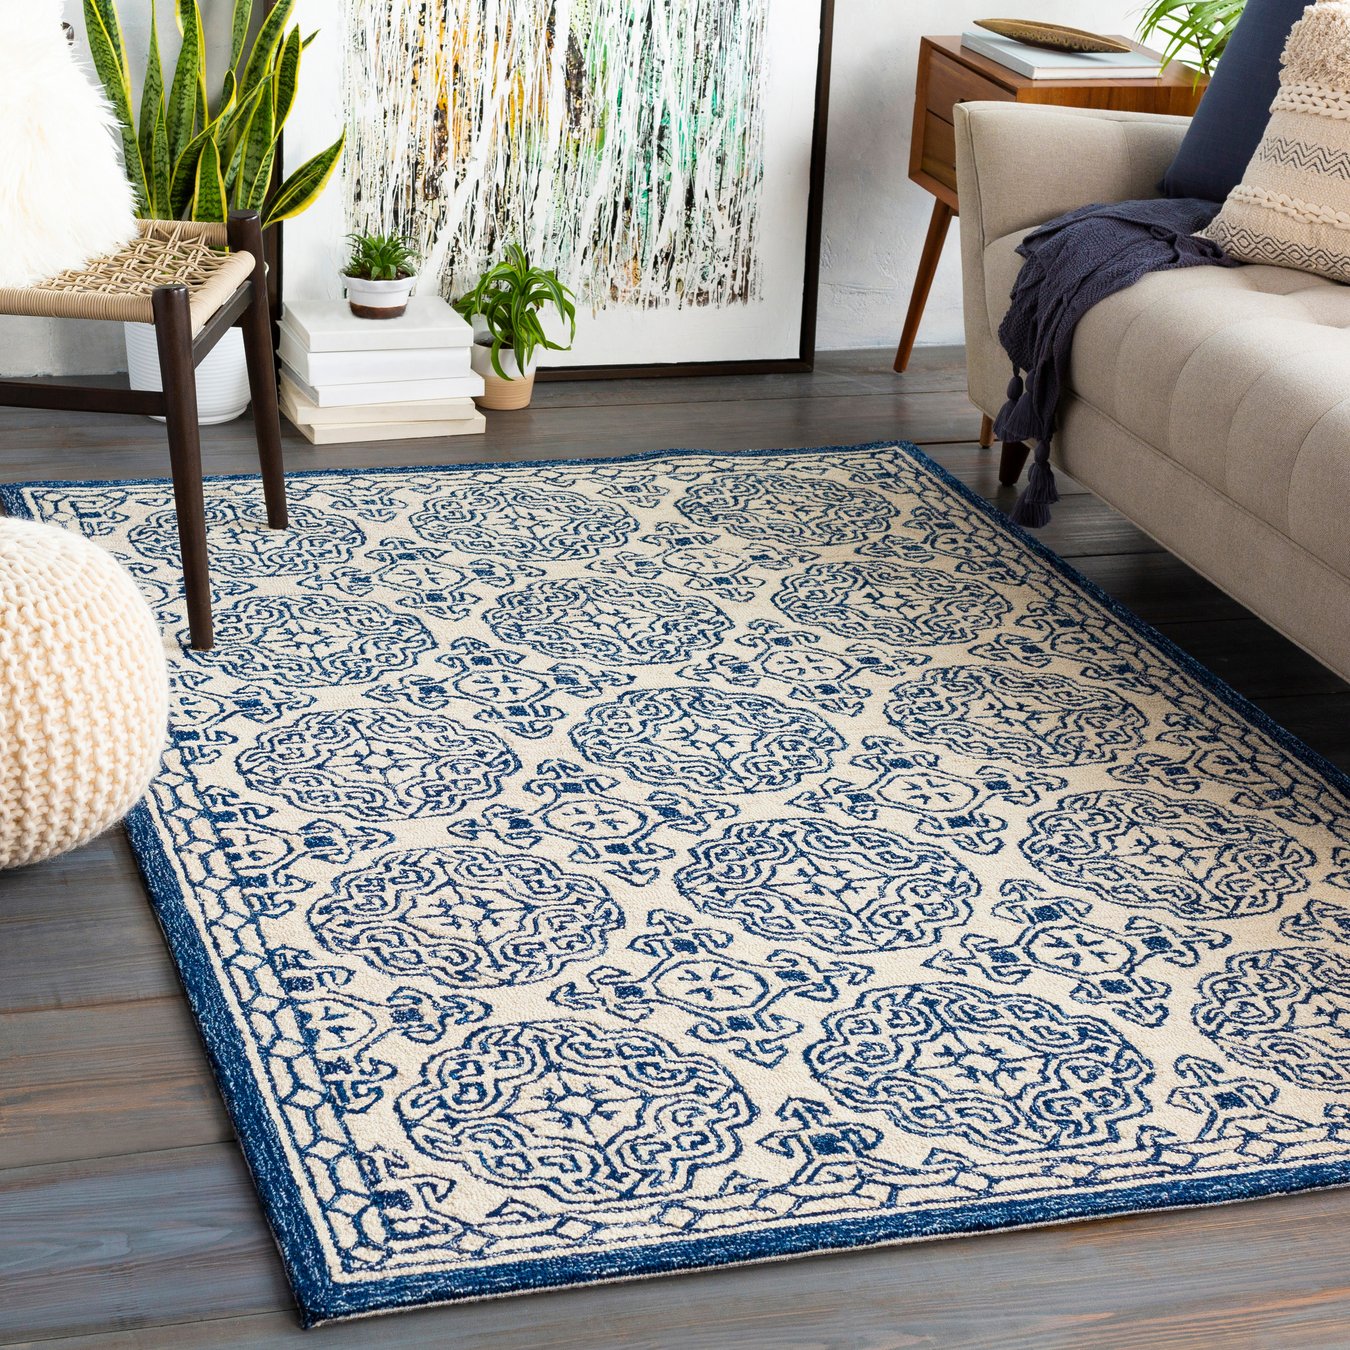 IVORY AND BLUE TRADITIONAL HAND TUFTED CARPET